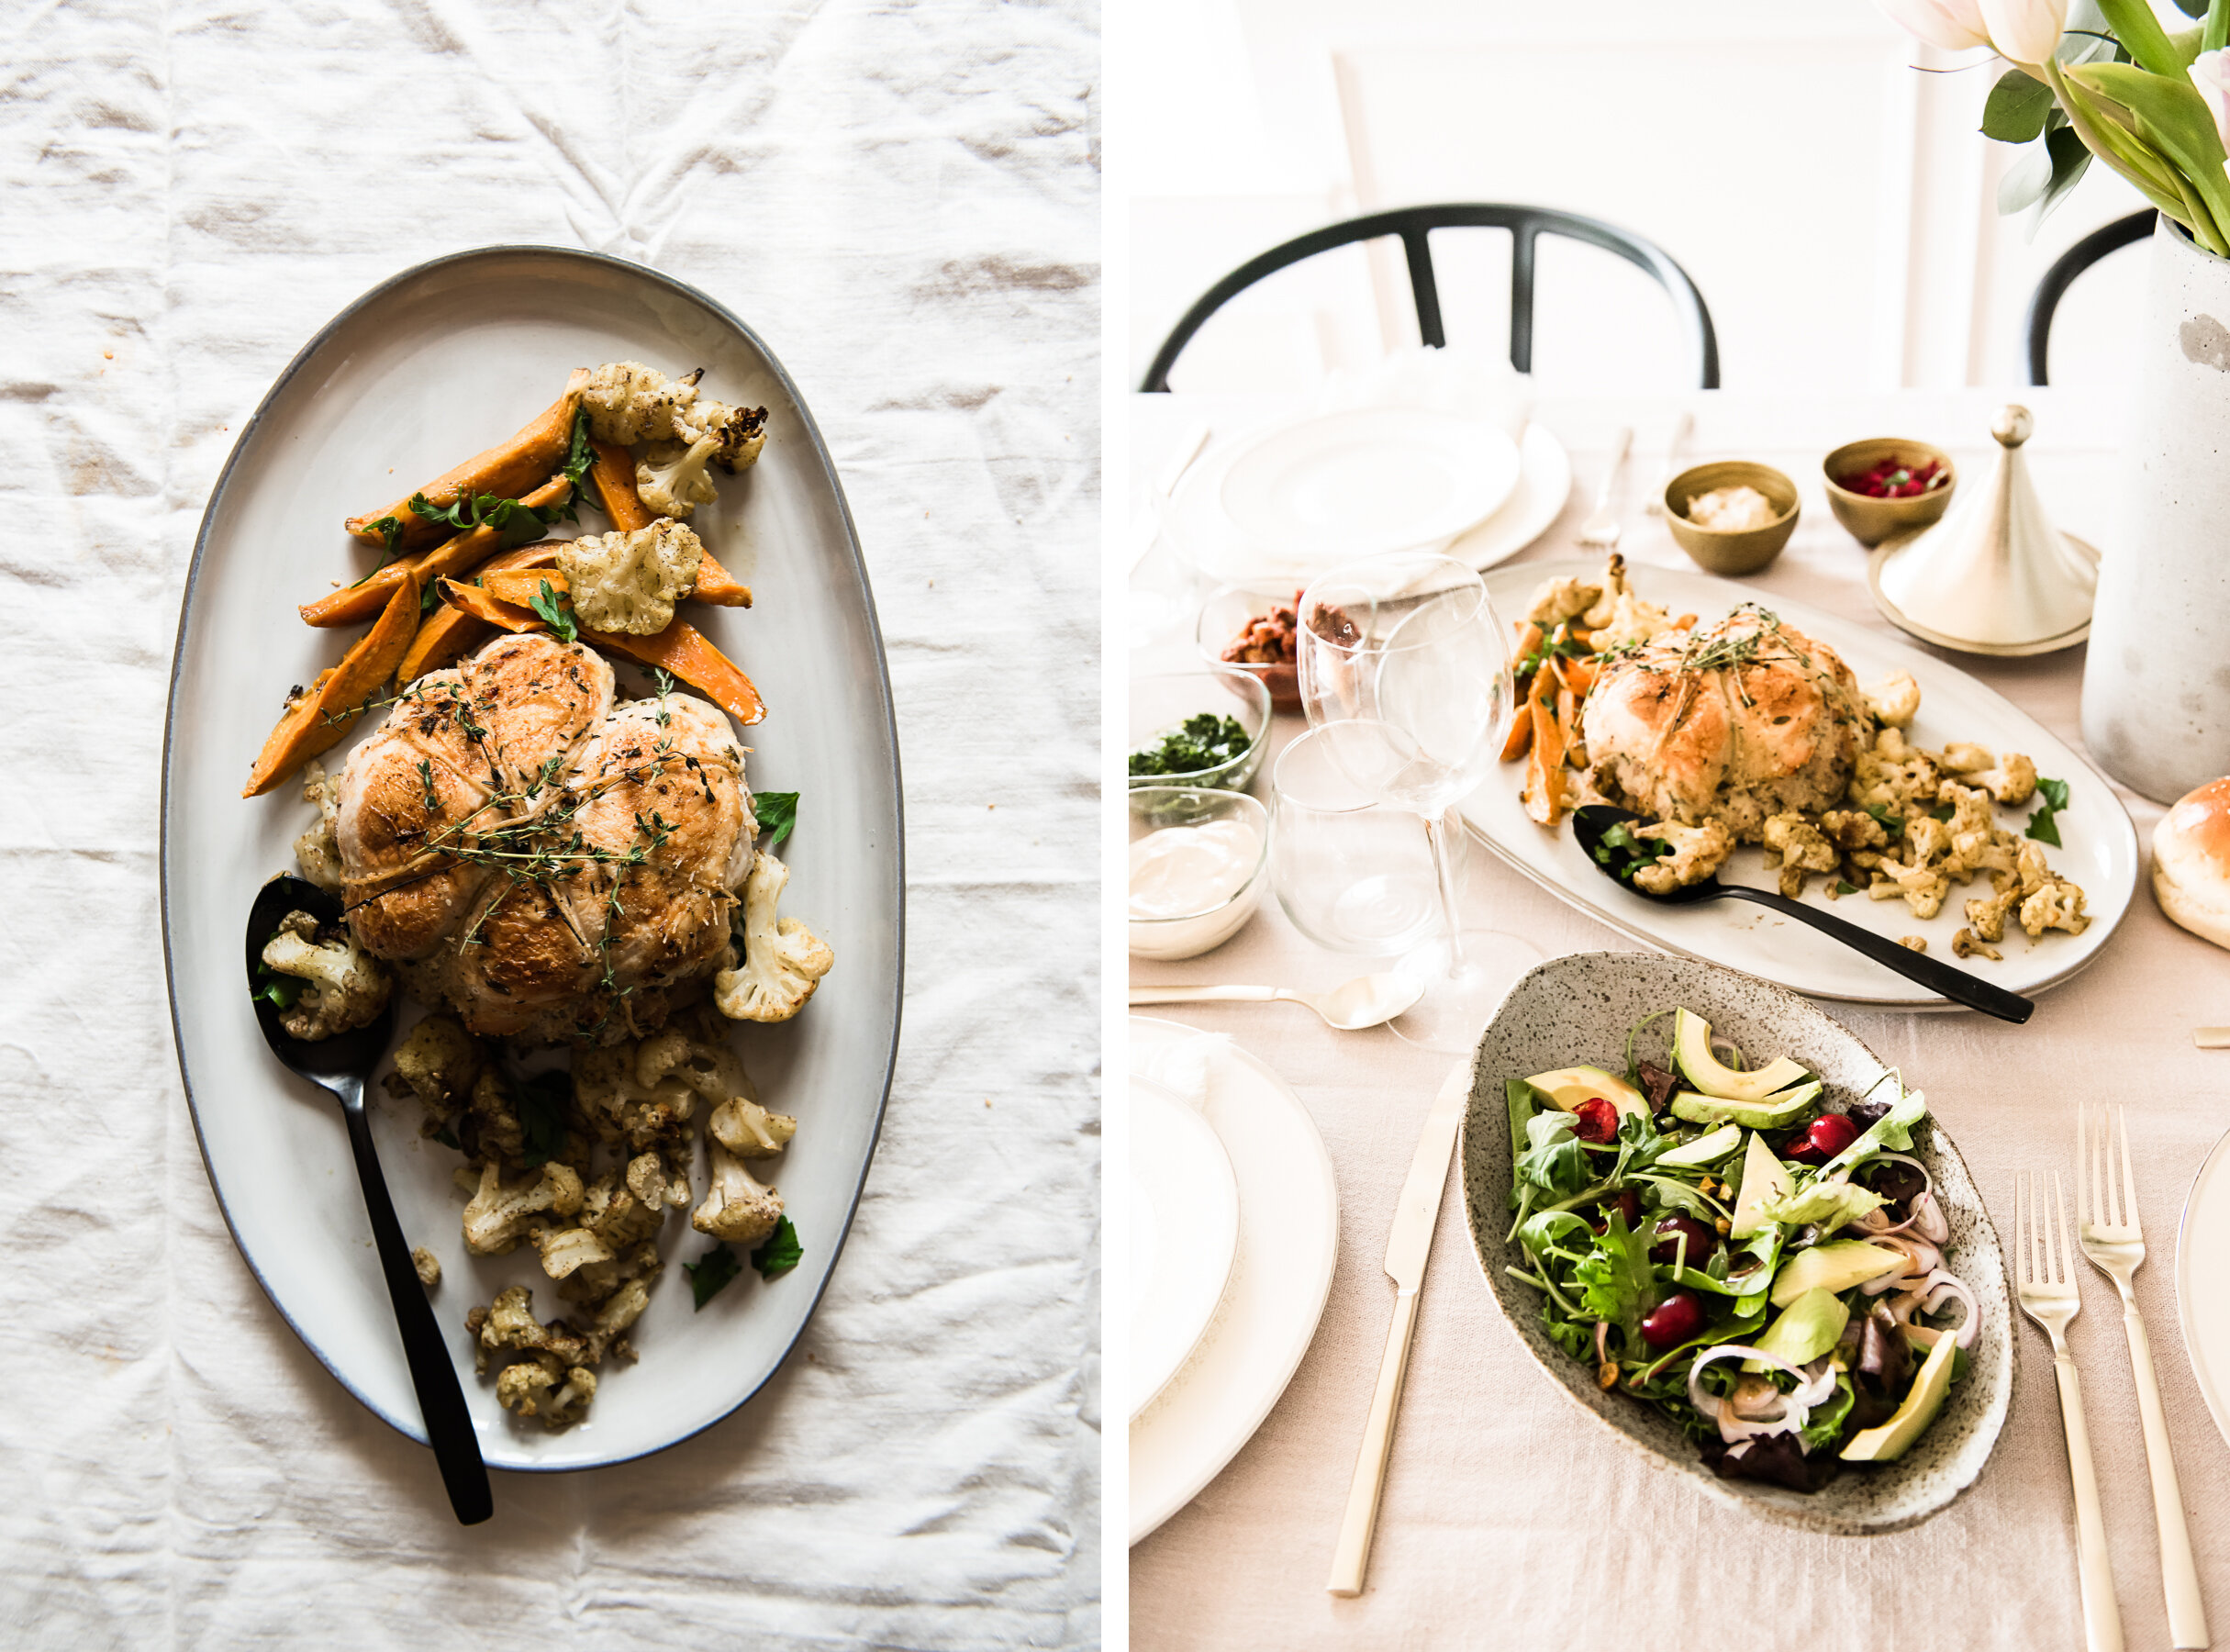 Couscous stuffed Chicken Cushion with Roasted Vegetables and Avocado Cherry Salad | Gather a Table